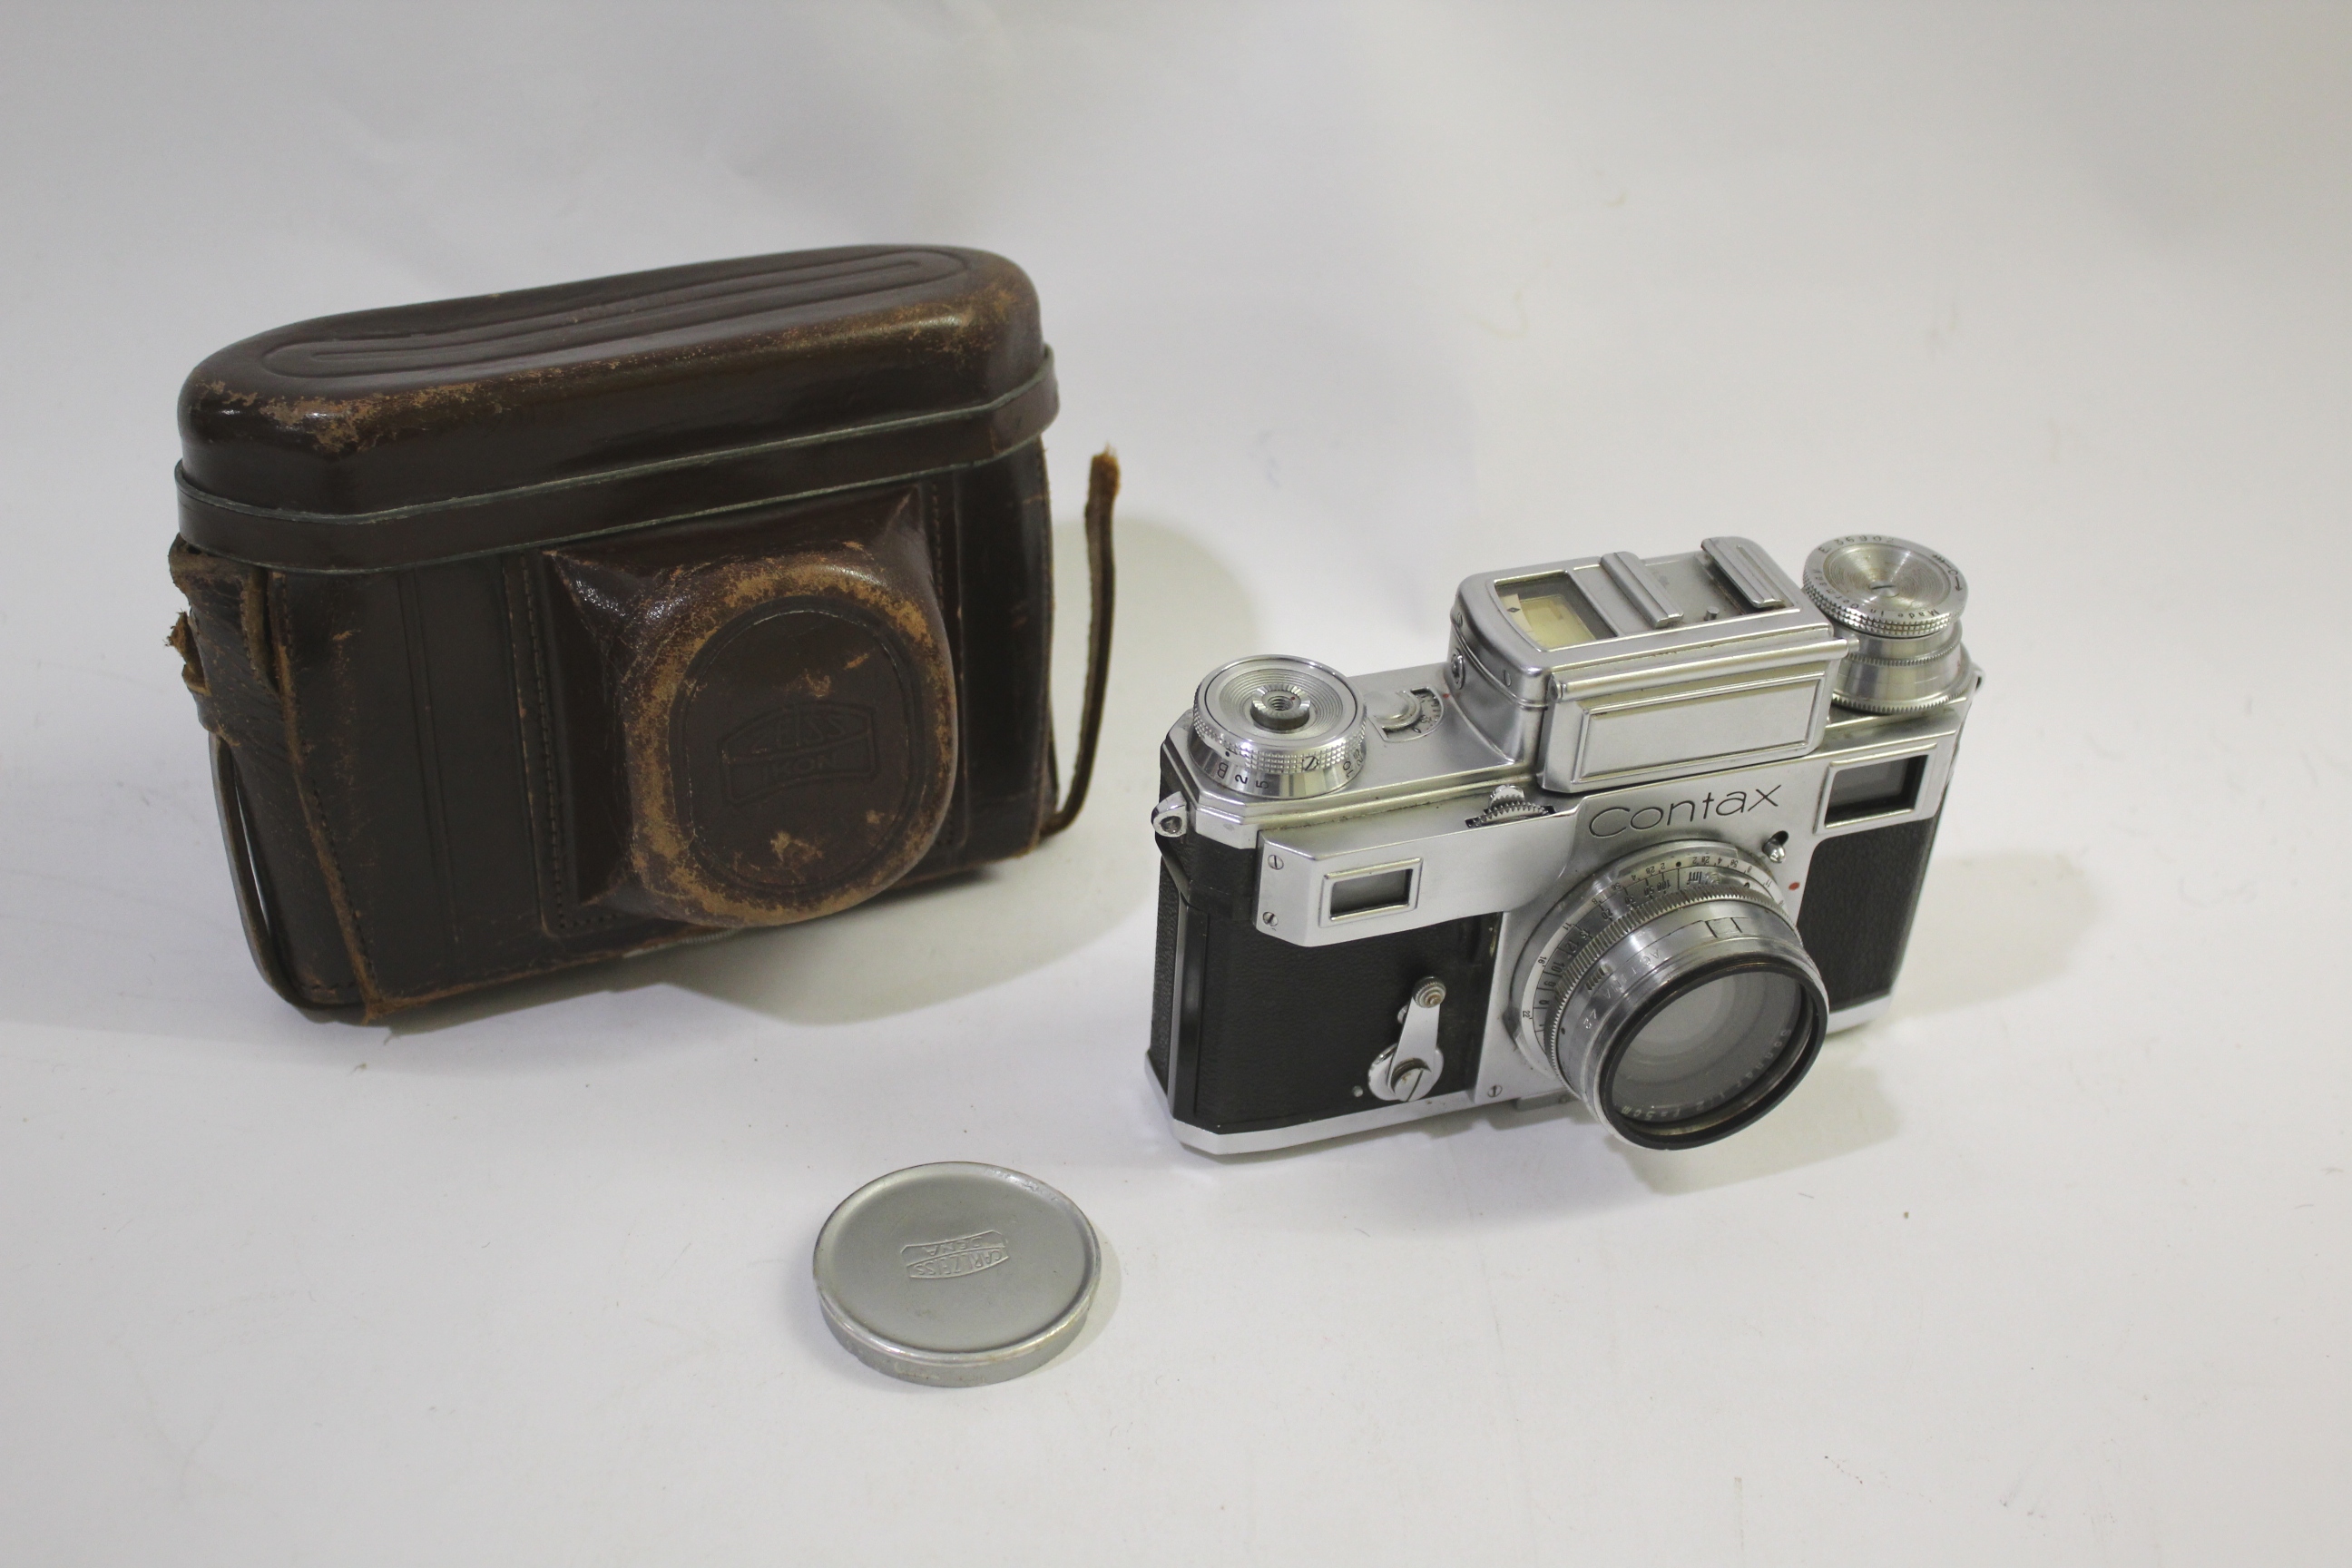 ZEISS IKON CONTAX CAMERA & LEATHER CASE a Contax camera with built in light meter and shutter speeds